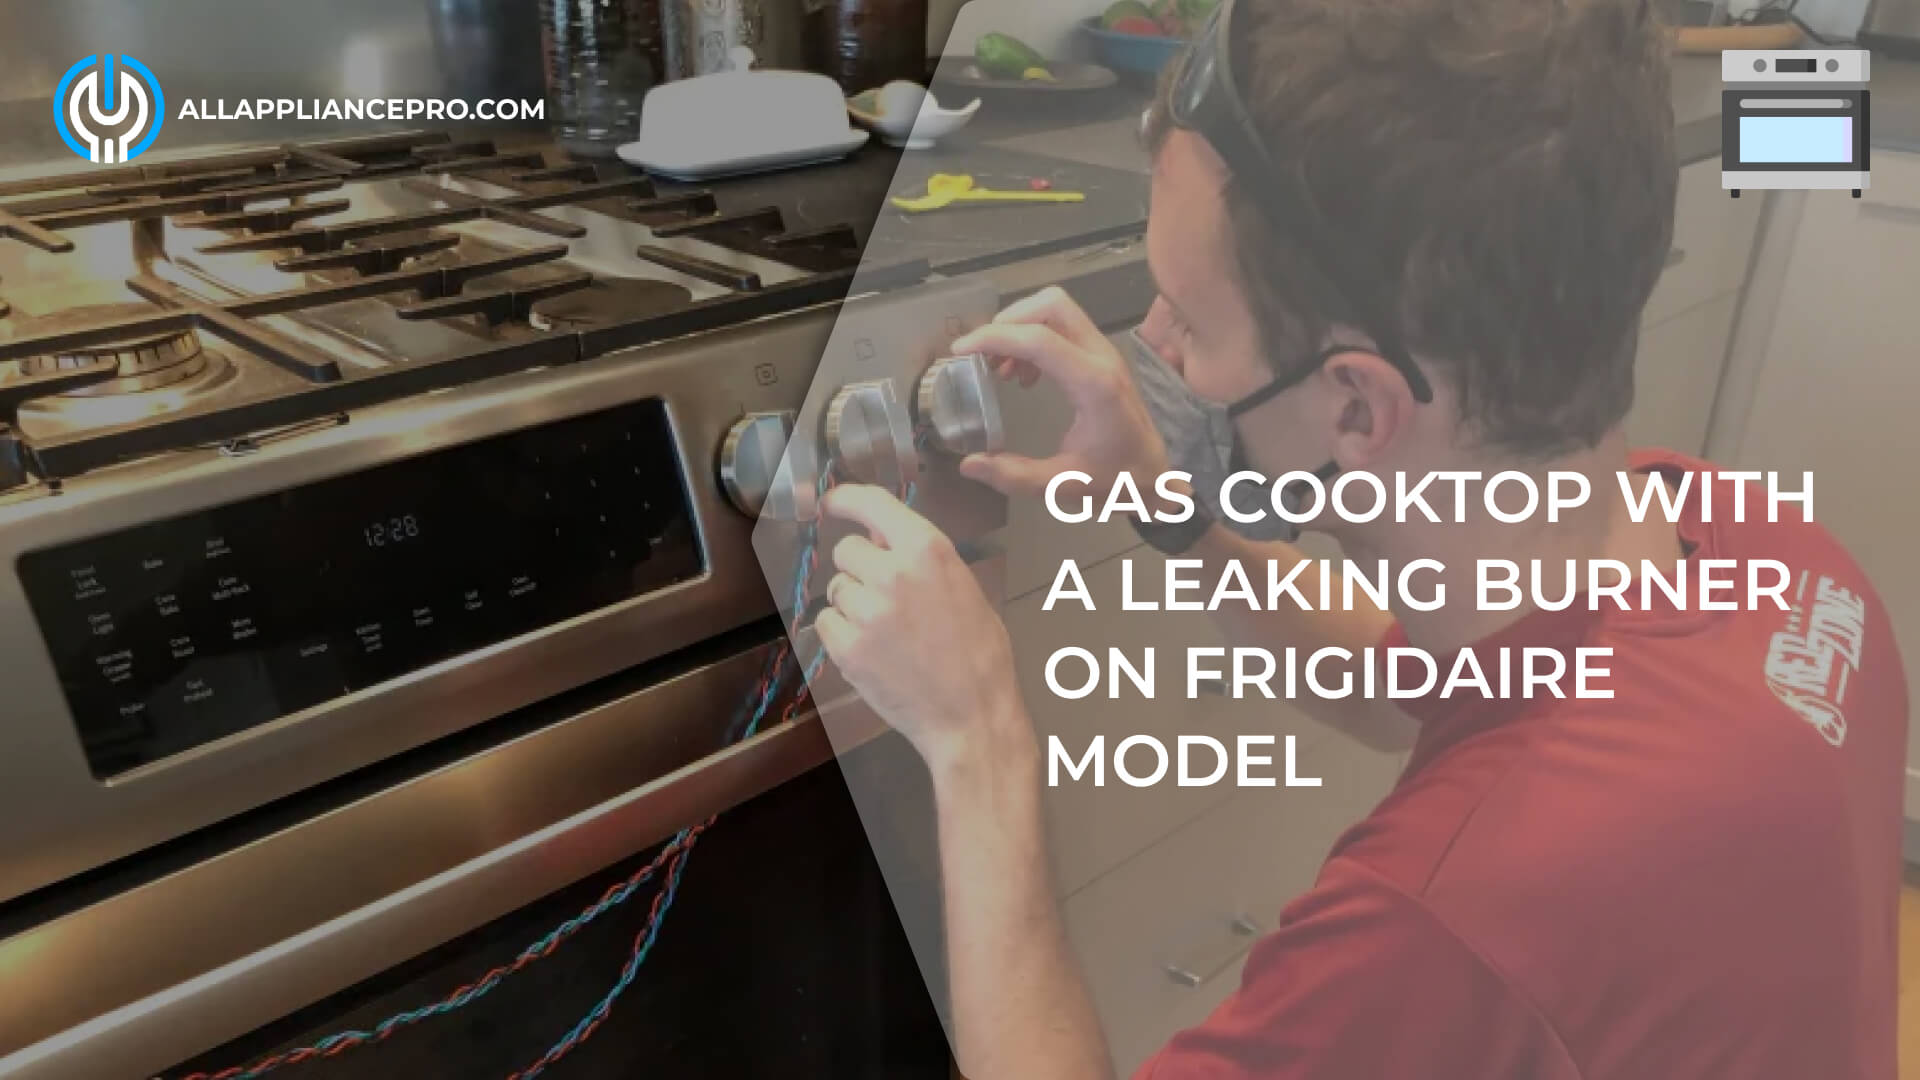 Gas Cooktop with a Leaking Burner on Frigidaire Model